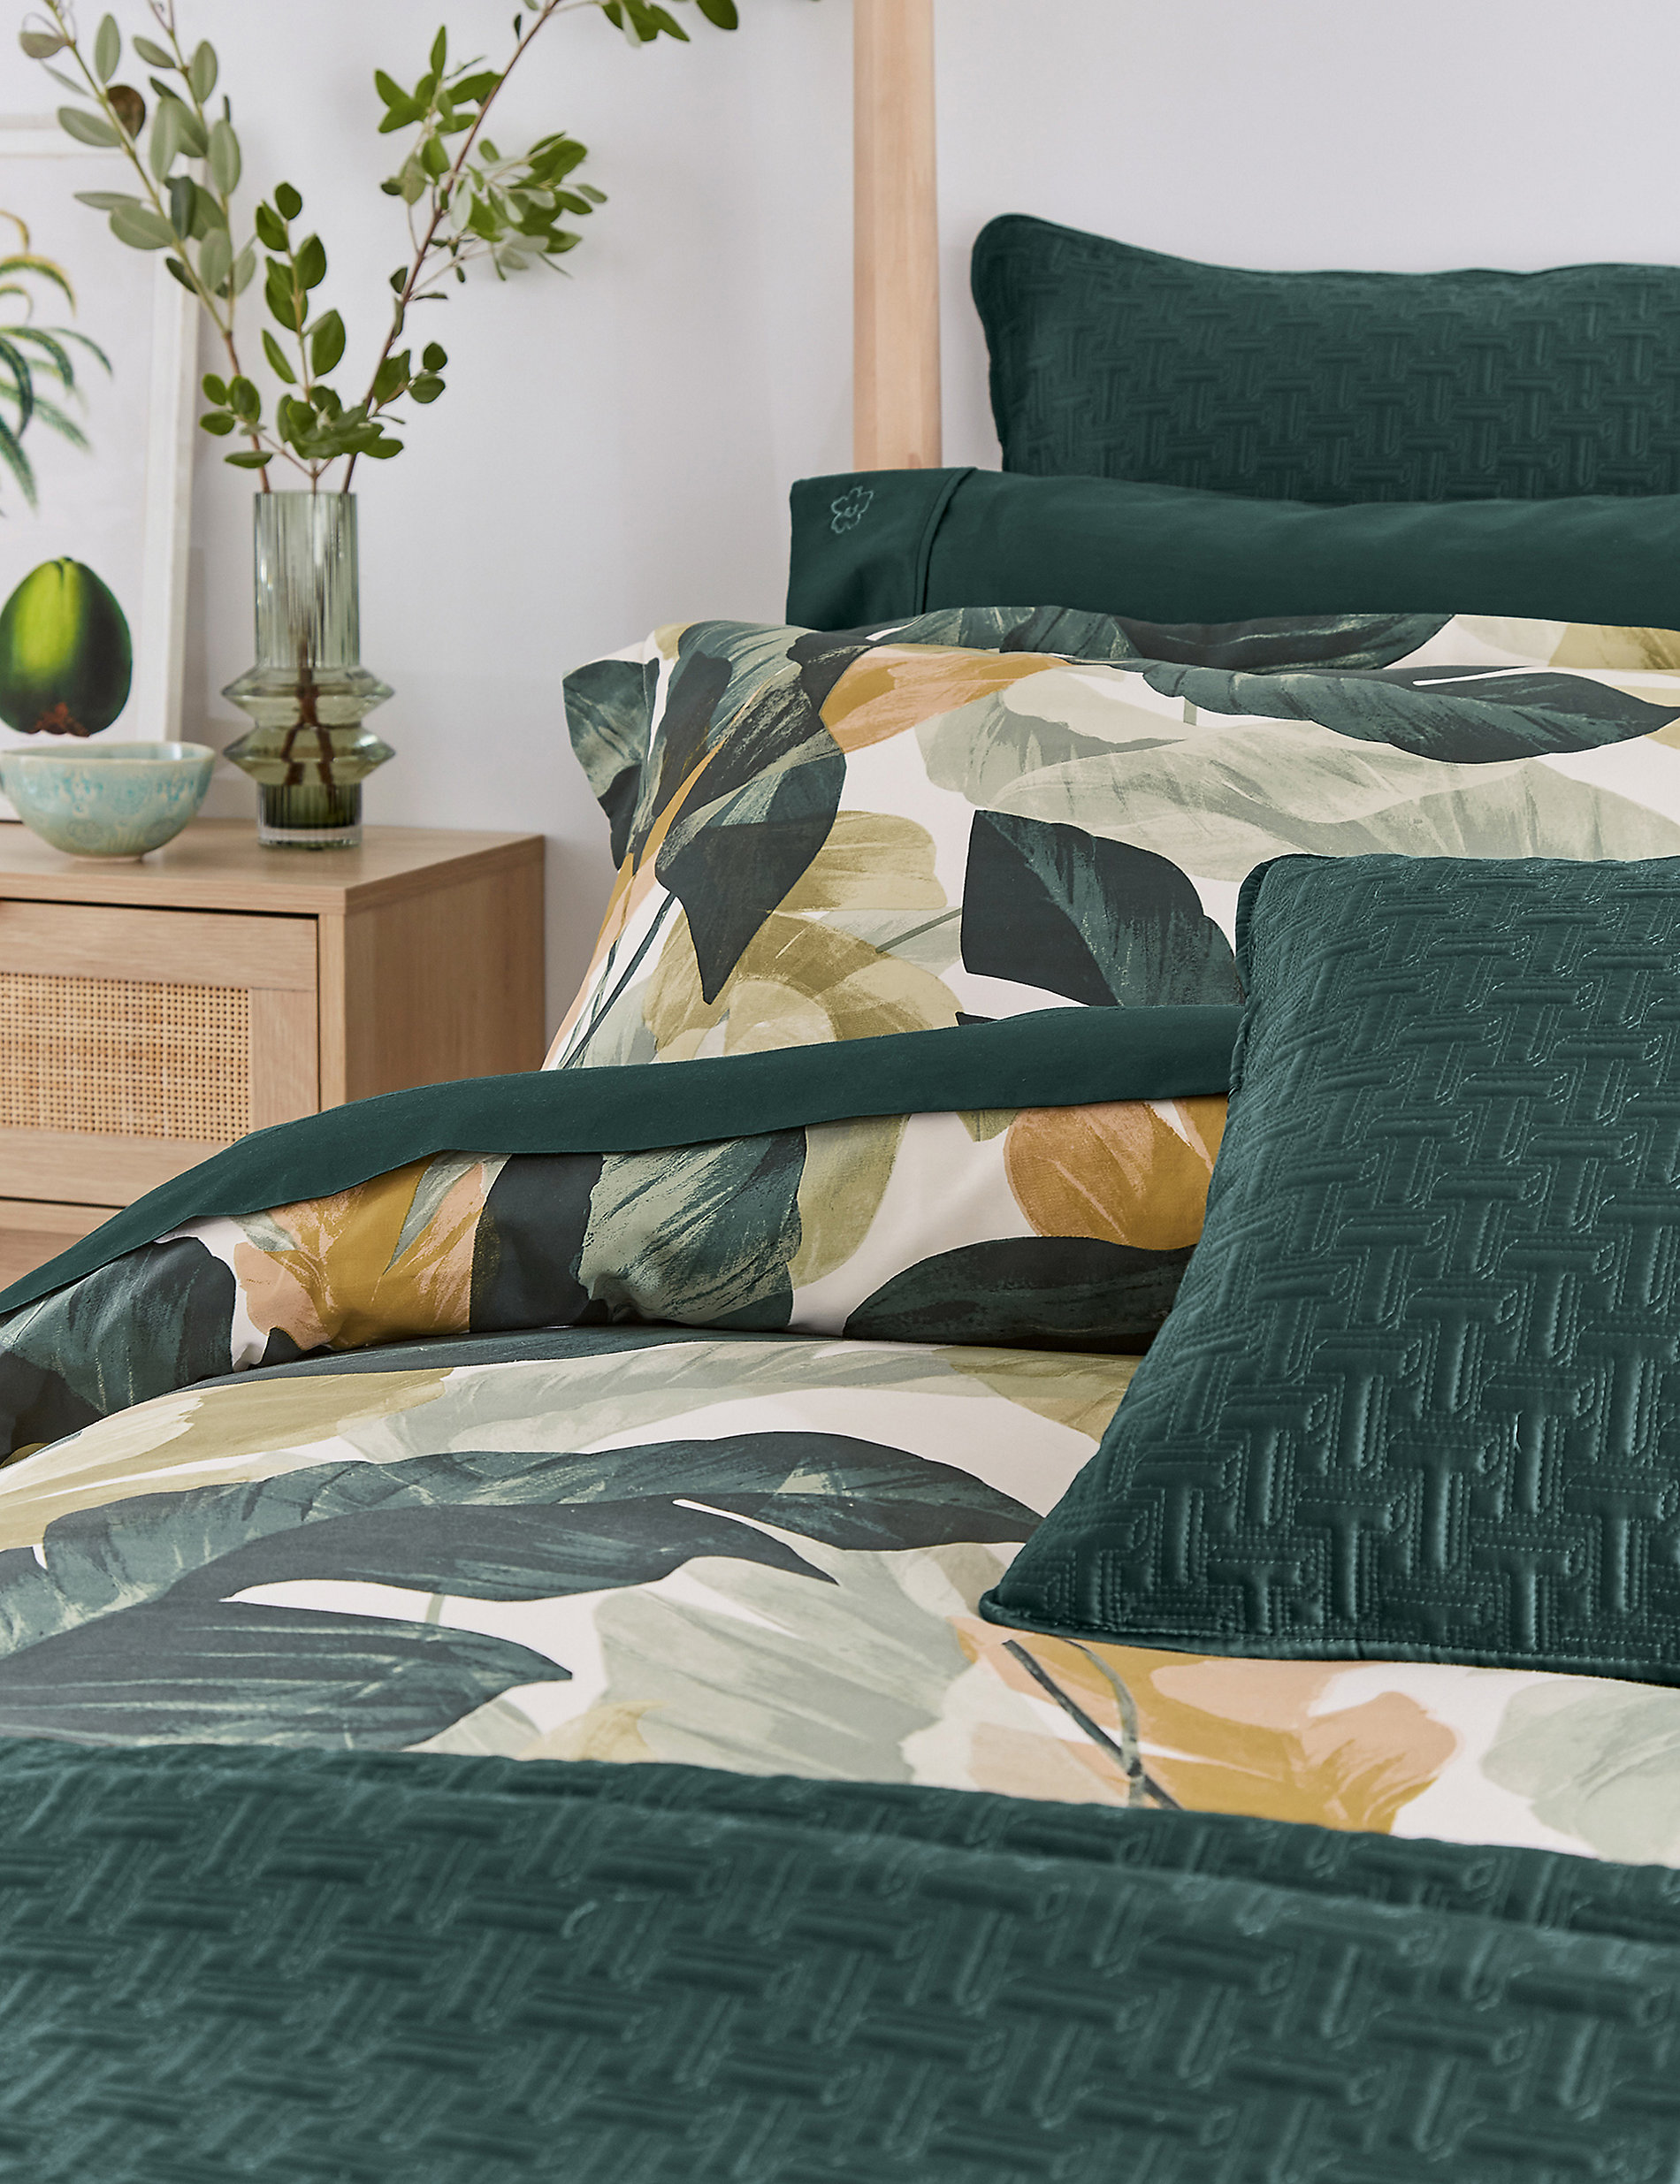 Pure Cotton Sateen Urban Forager Duvet Cover